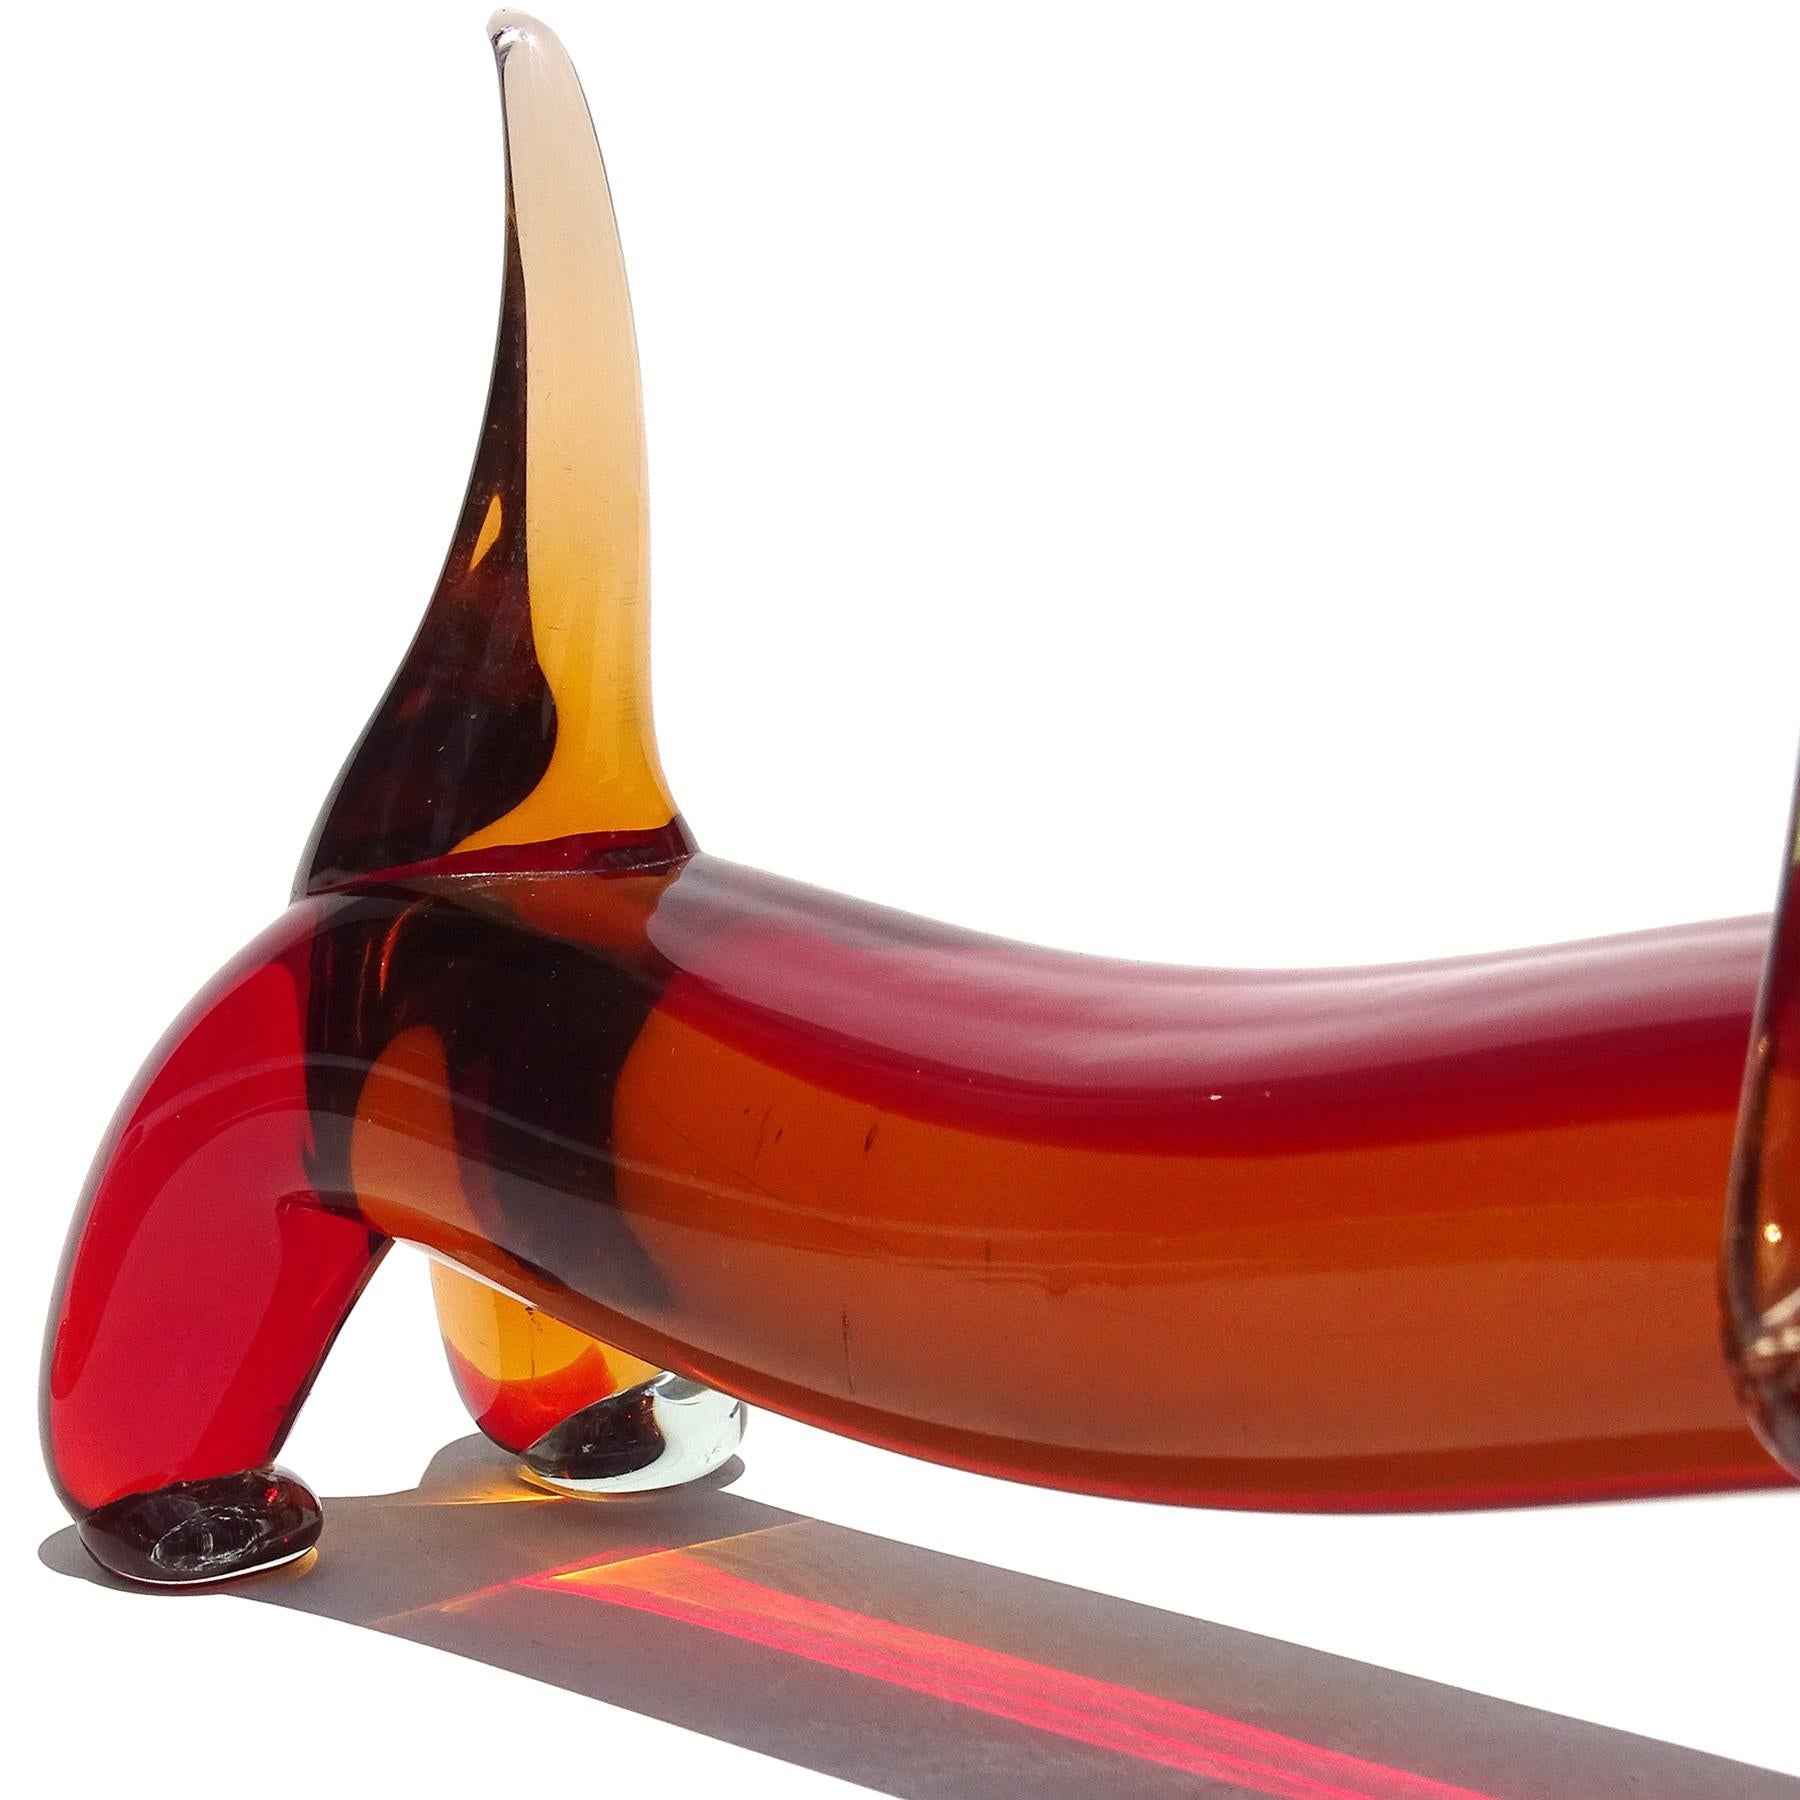 Murano Vintage Sommerso Red Orange Italian Art Glass Dachshund Dog Sculpture In Good Condition For Sale In Kissimmee, FL